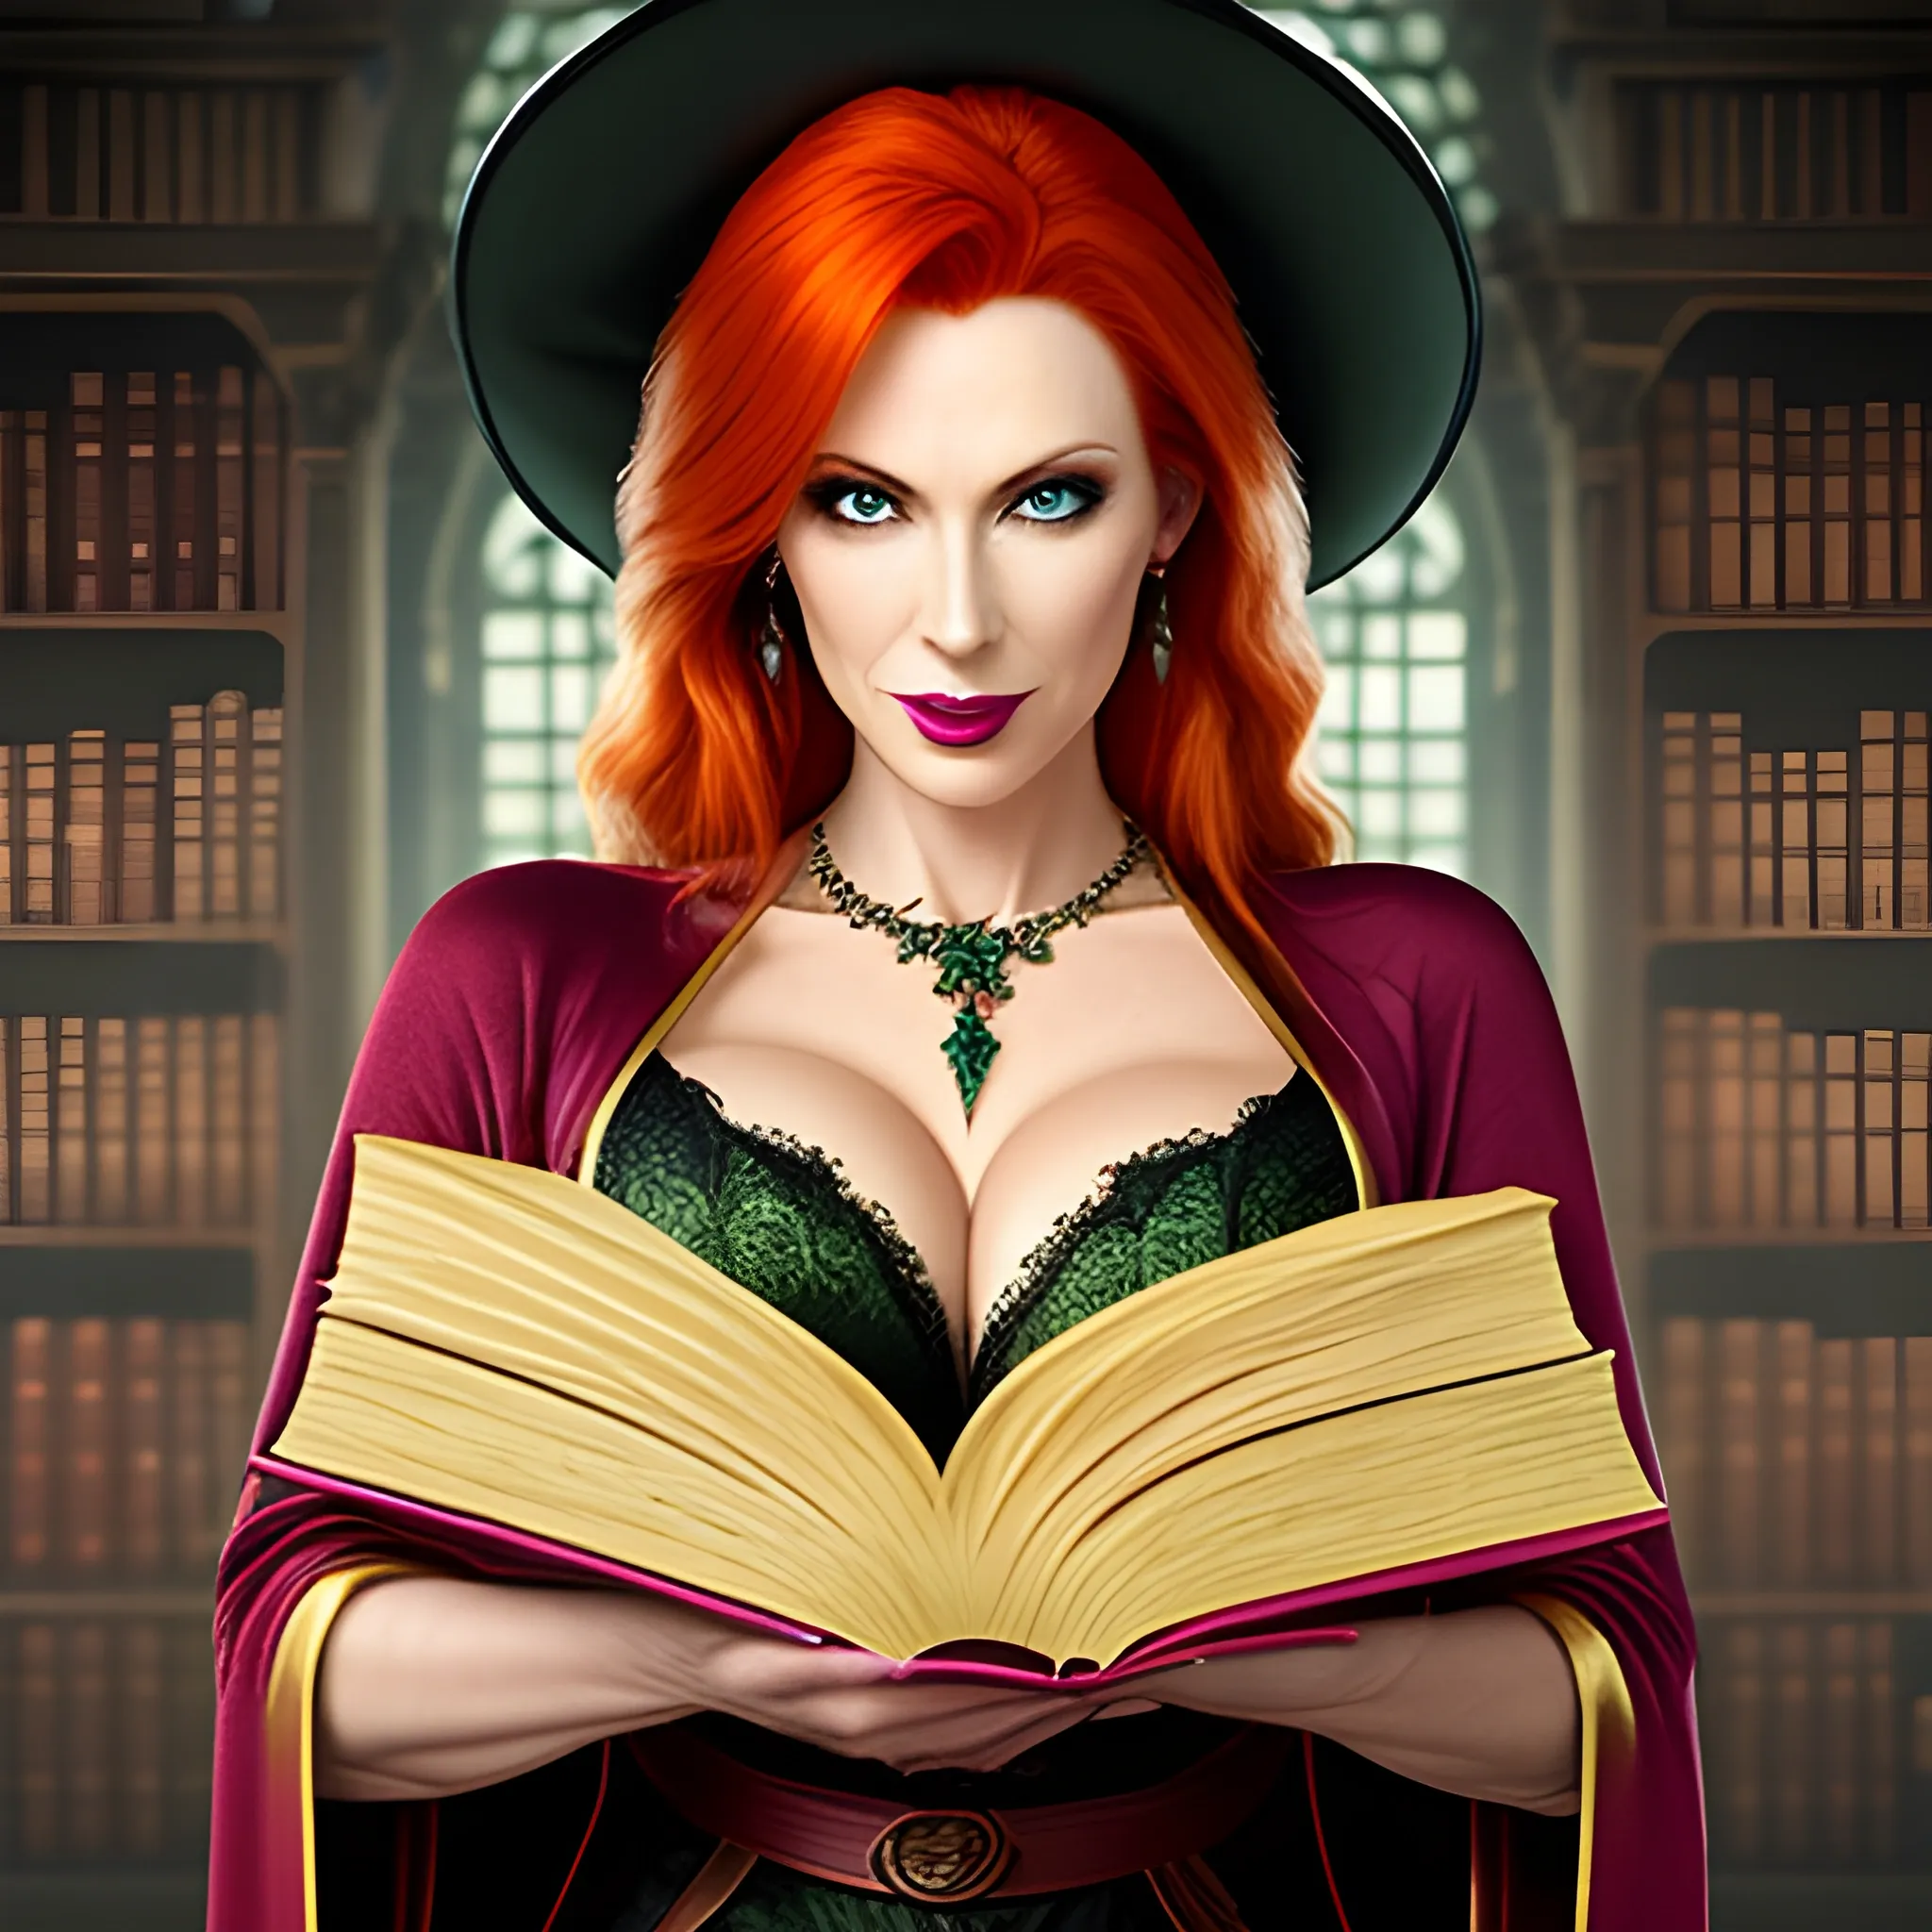 library background, BREAK
1girl, fantasy, witch, revealing robe, mature looking, round breasts, ginger hair, frackles, green eyes, close up, serious expression, diamond necklace, reading a book